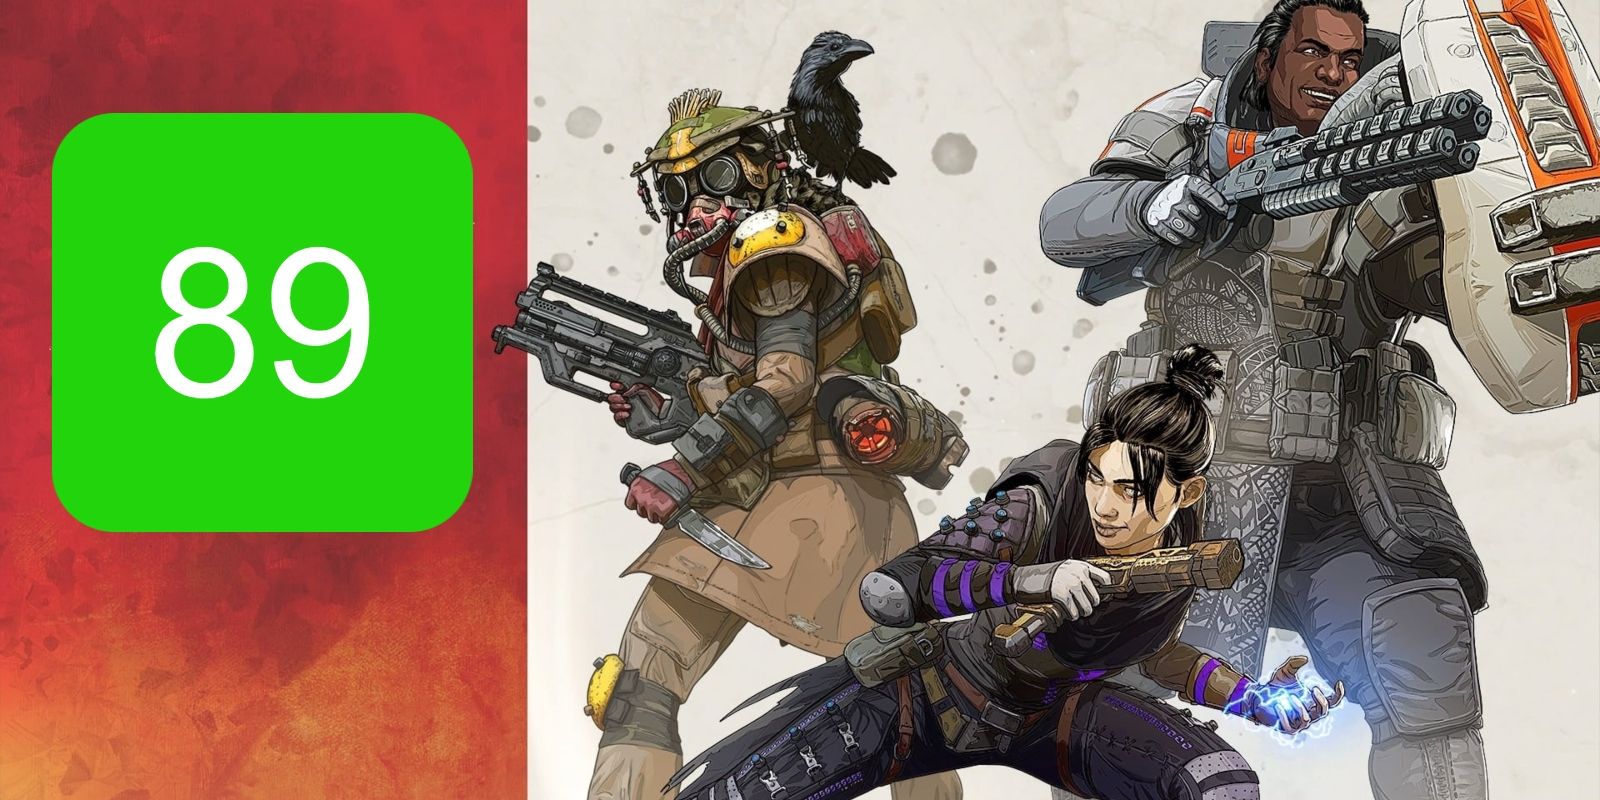 The Apex Legends Metascore for the PS4 featuring Bloodhound, Wraith, and Gibraltar